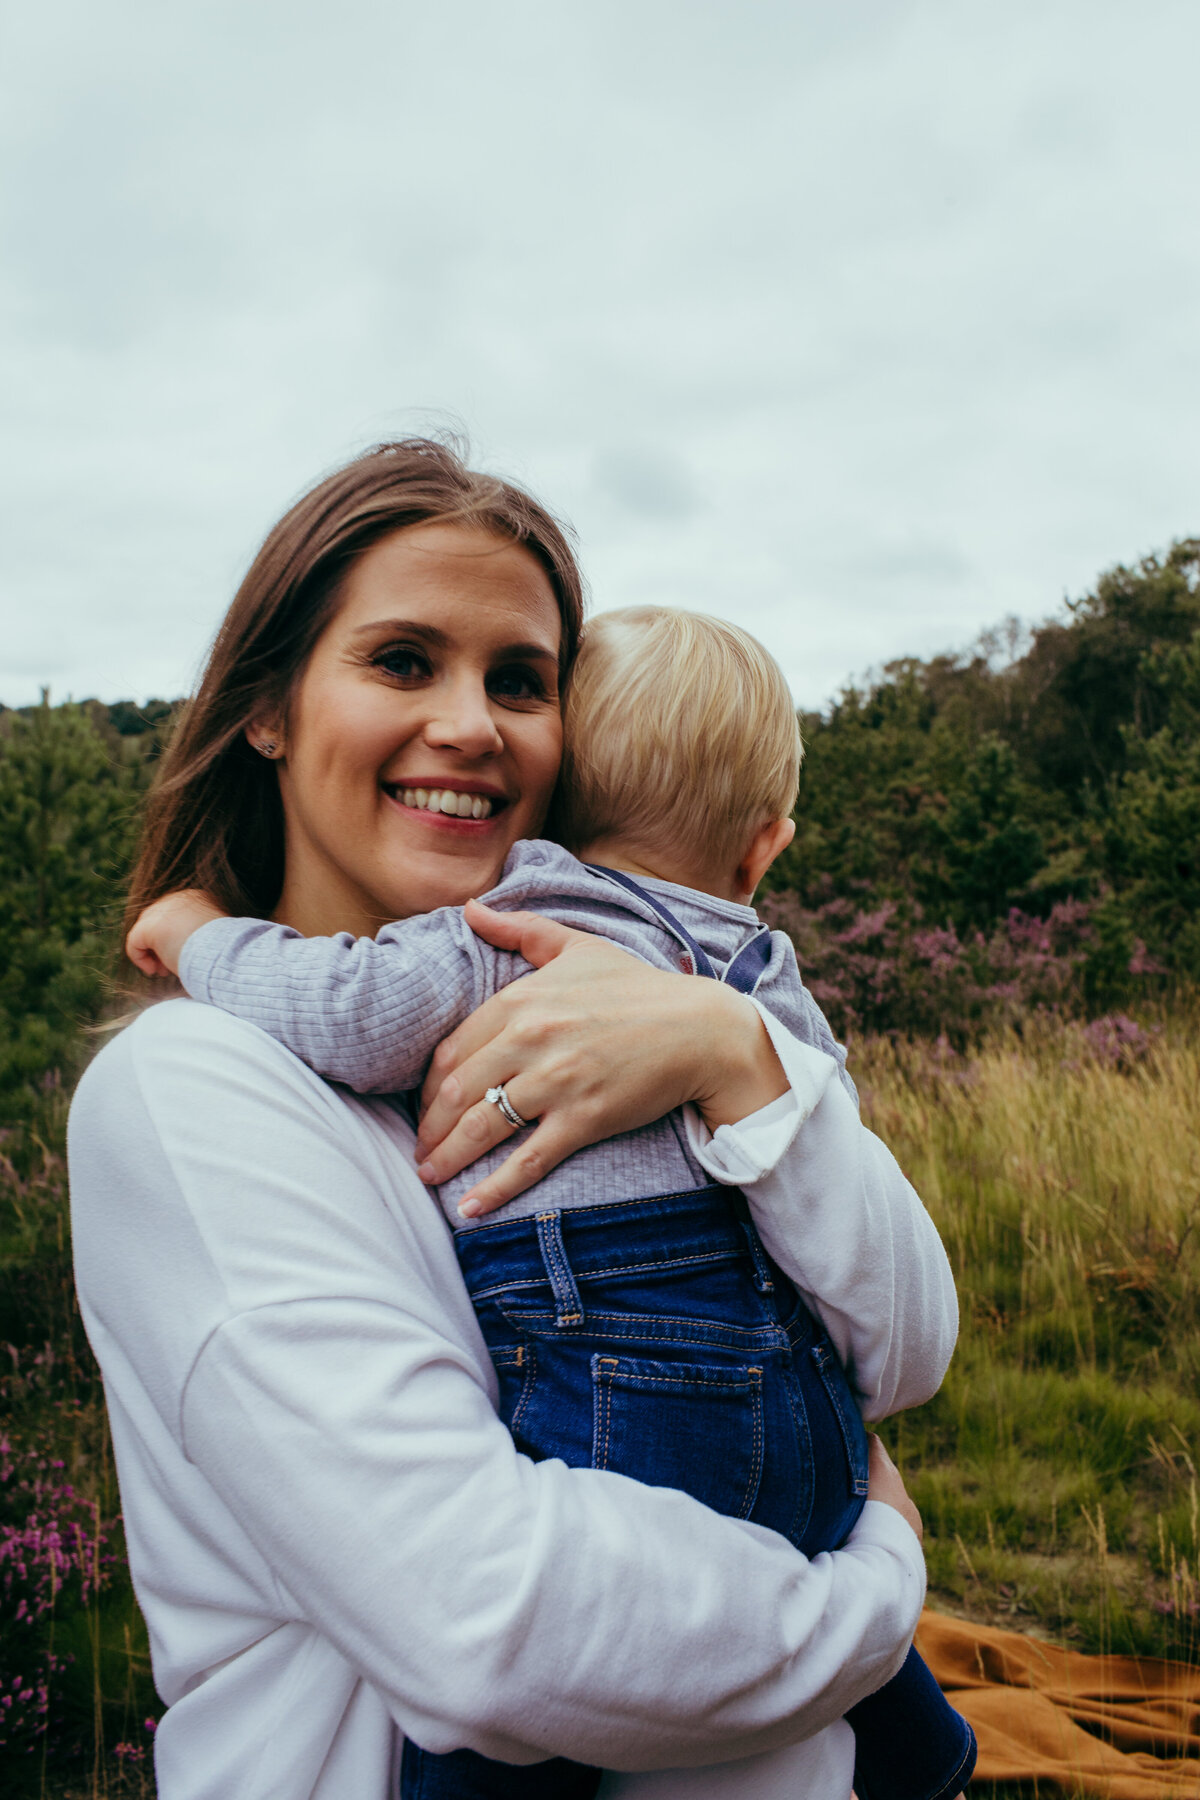 Chobham common is one of the best locations for family mini shoots, the colours of the wild plants are amazing